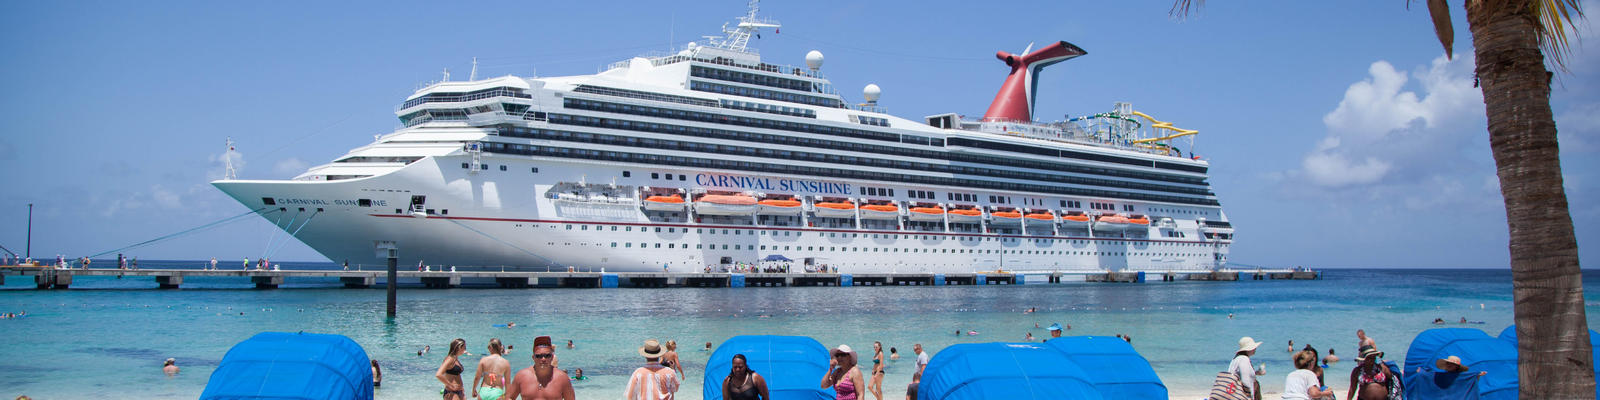 How To Find The Best Cruise Bargains Photo Critic